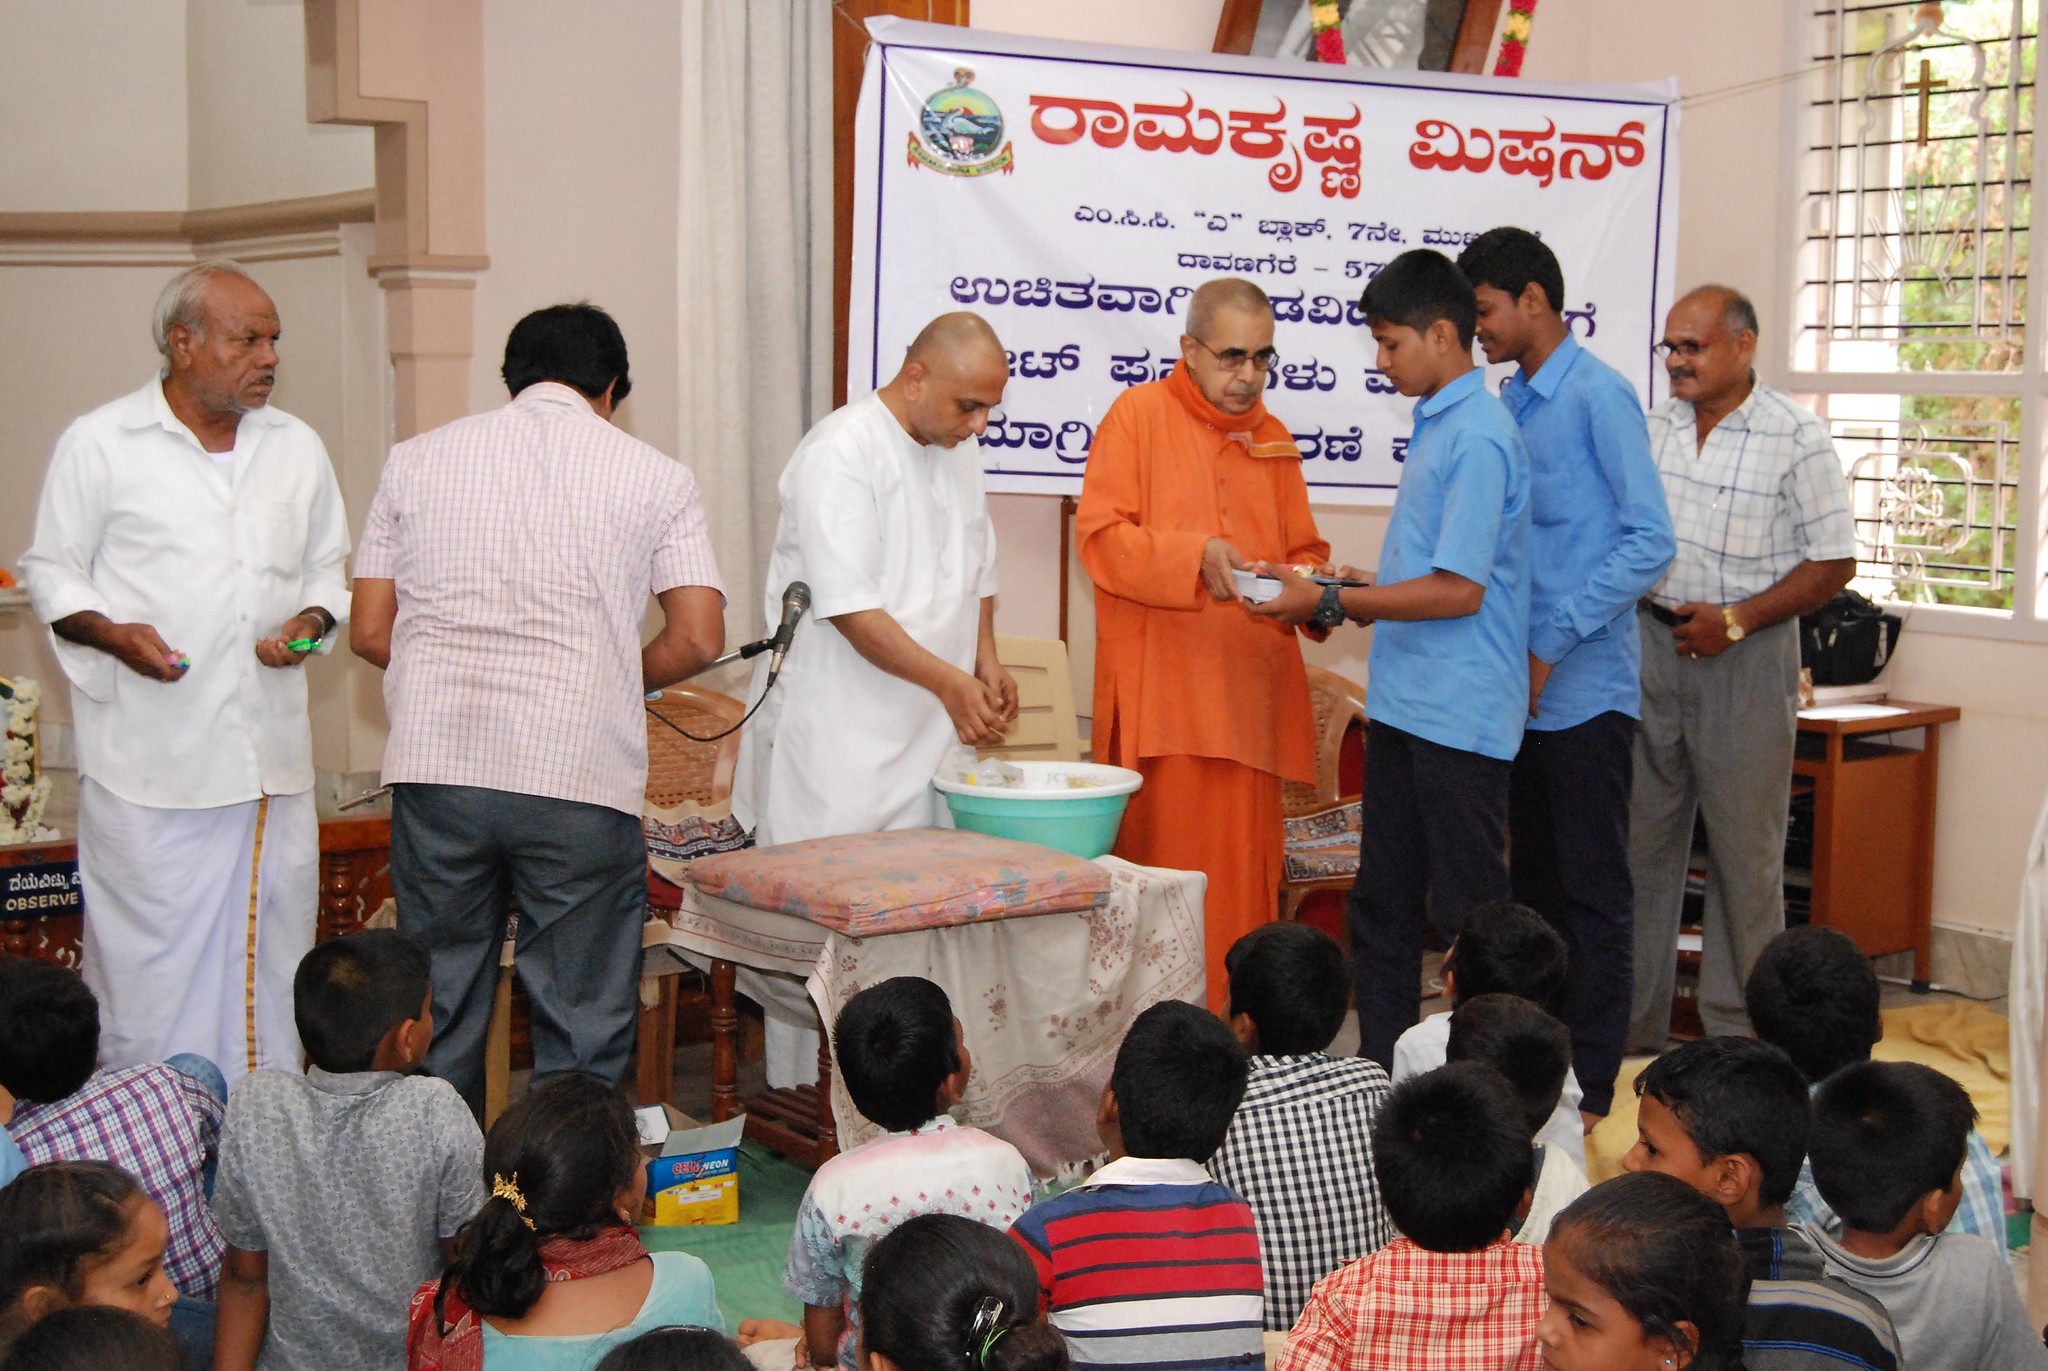 Stationery items distribution by Davanagere centre